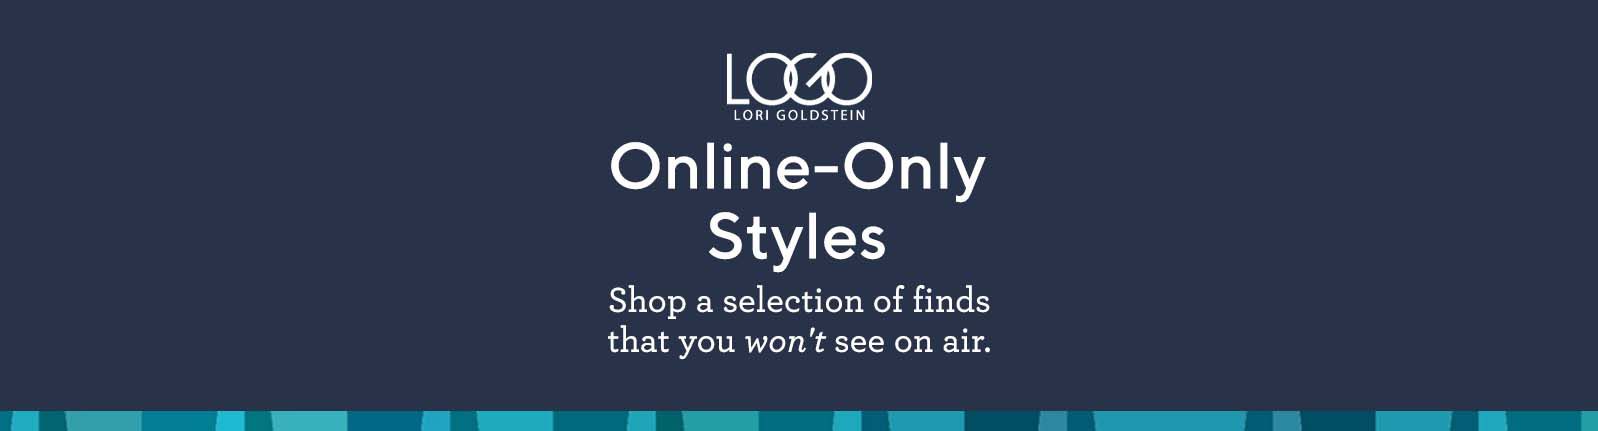 LOGO by Lori Goldstein®.  Online-Only Styles.  Shop a selection of finds that you won't see on air.